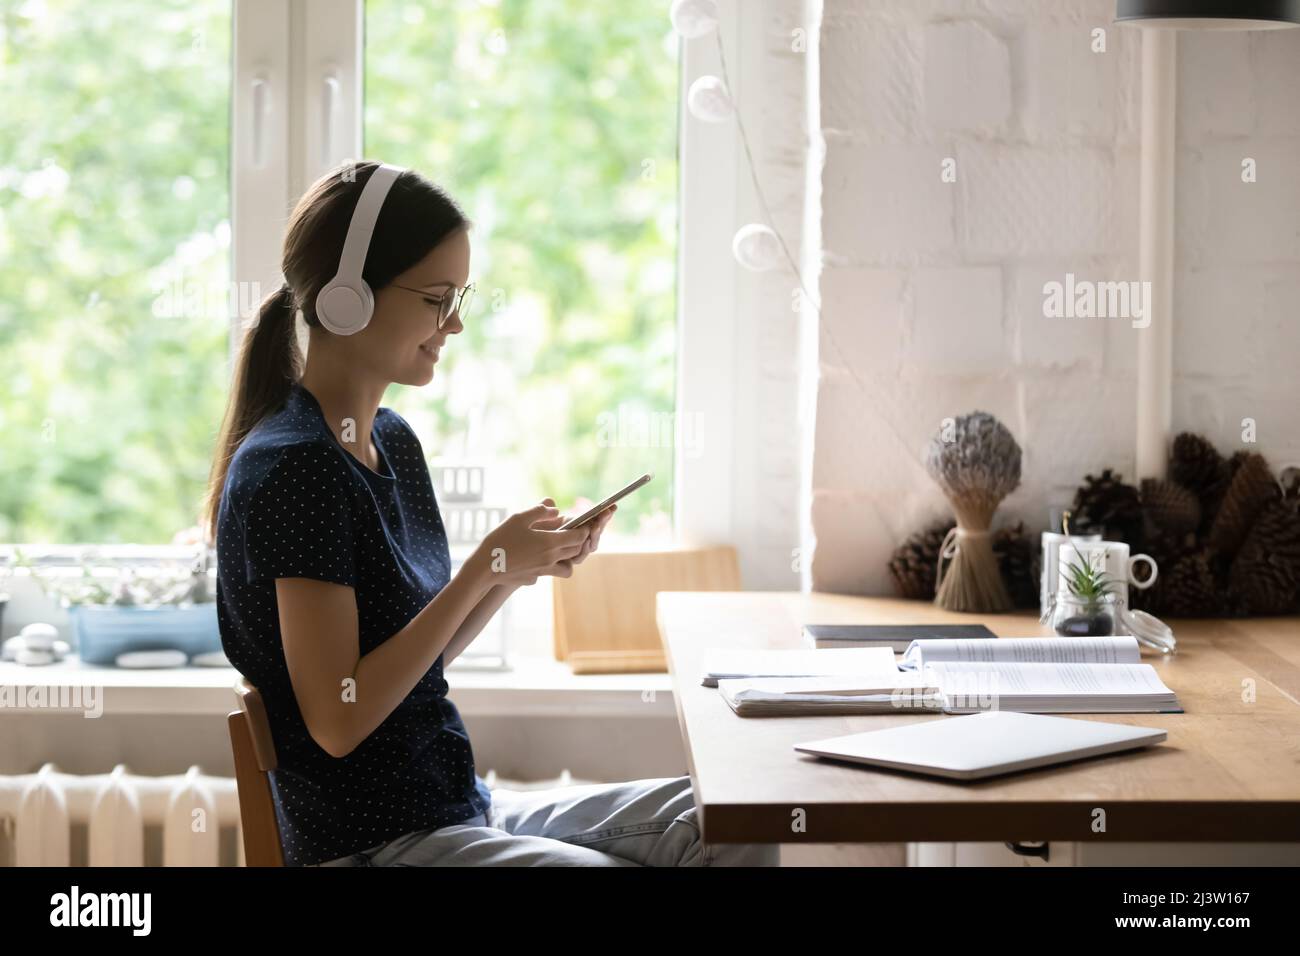 Woman in headphones holds smartphone choose music through digital services Stock Photo